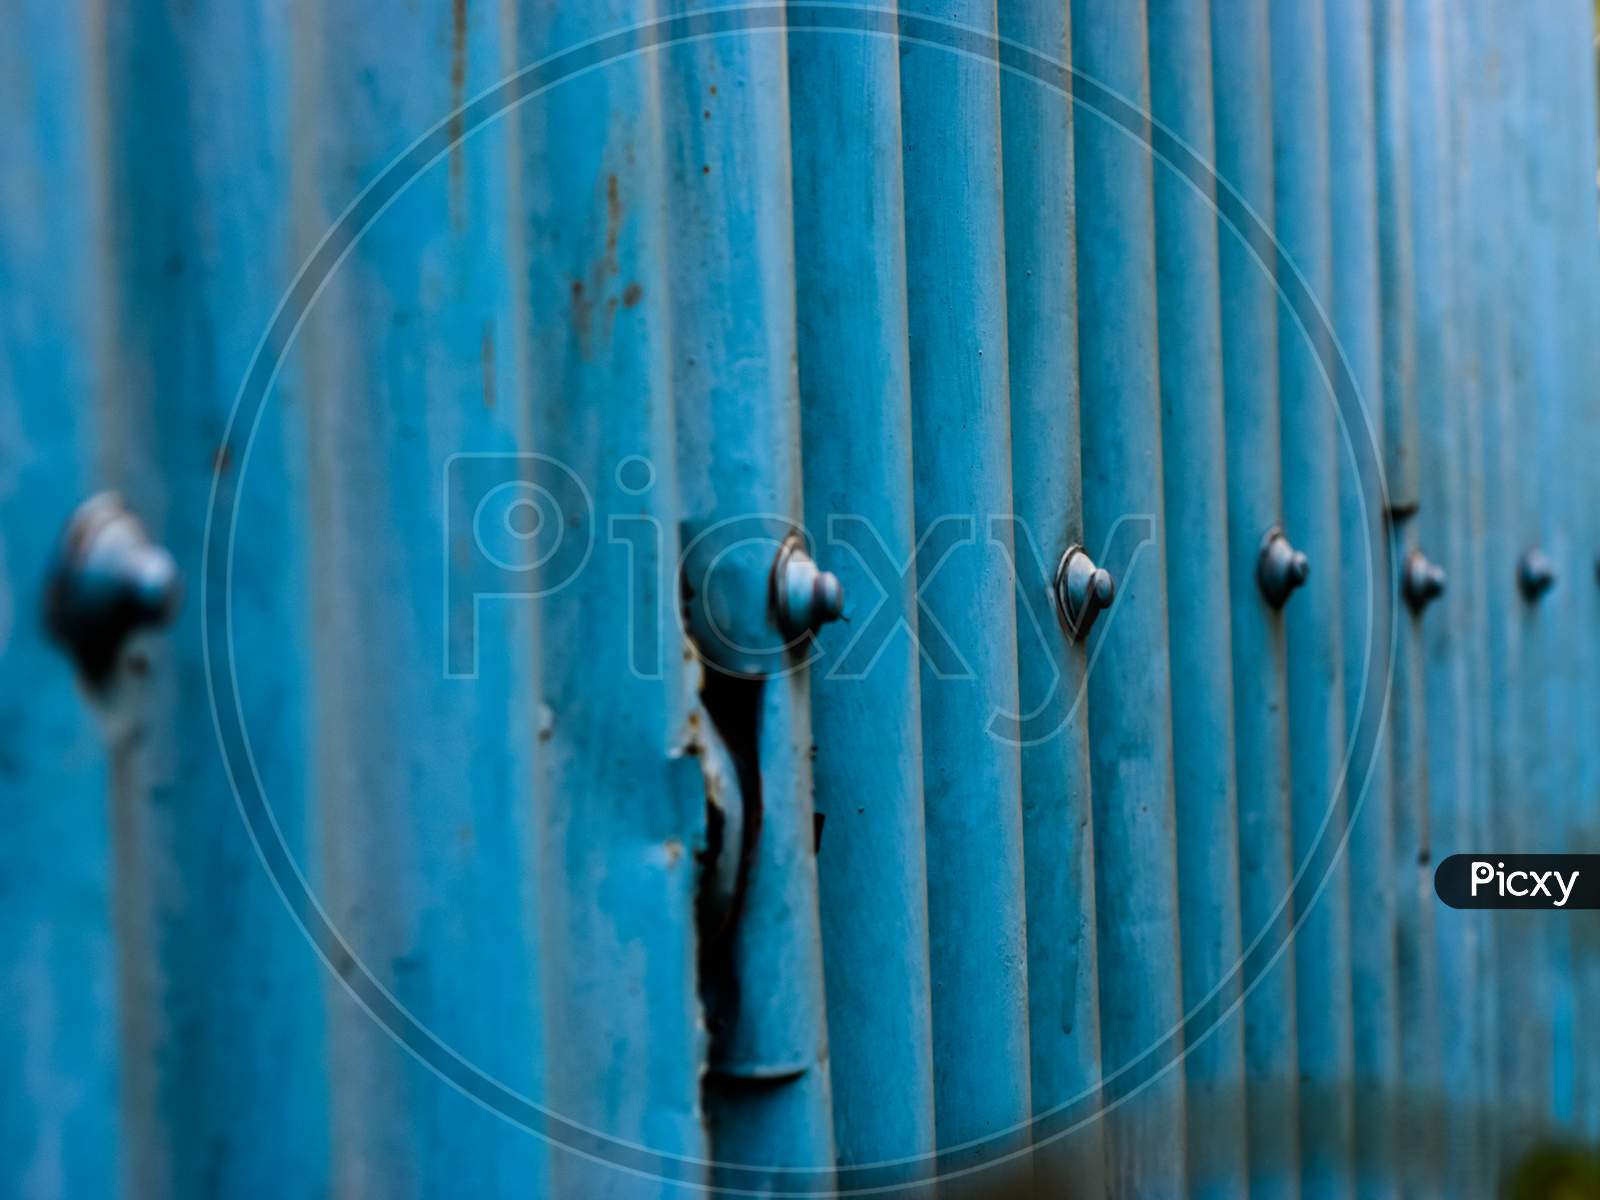 A Wall Made Of Corrugated Galvanized Iron (Gci) Sheet And Nuts(Edited)